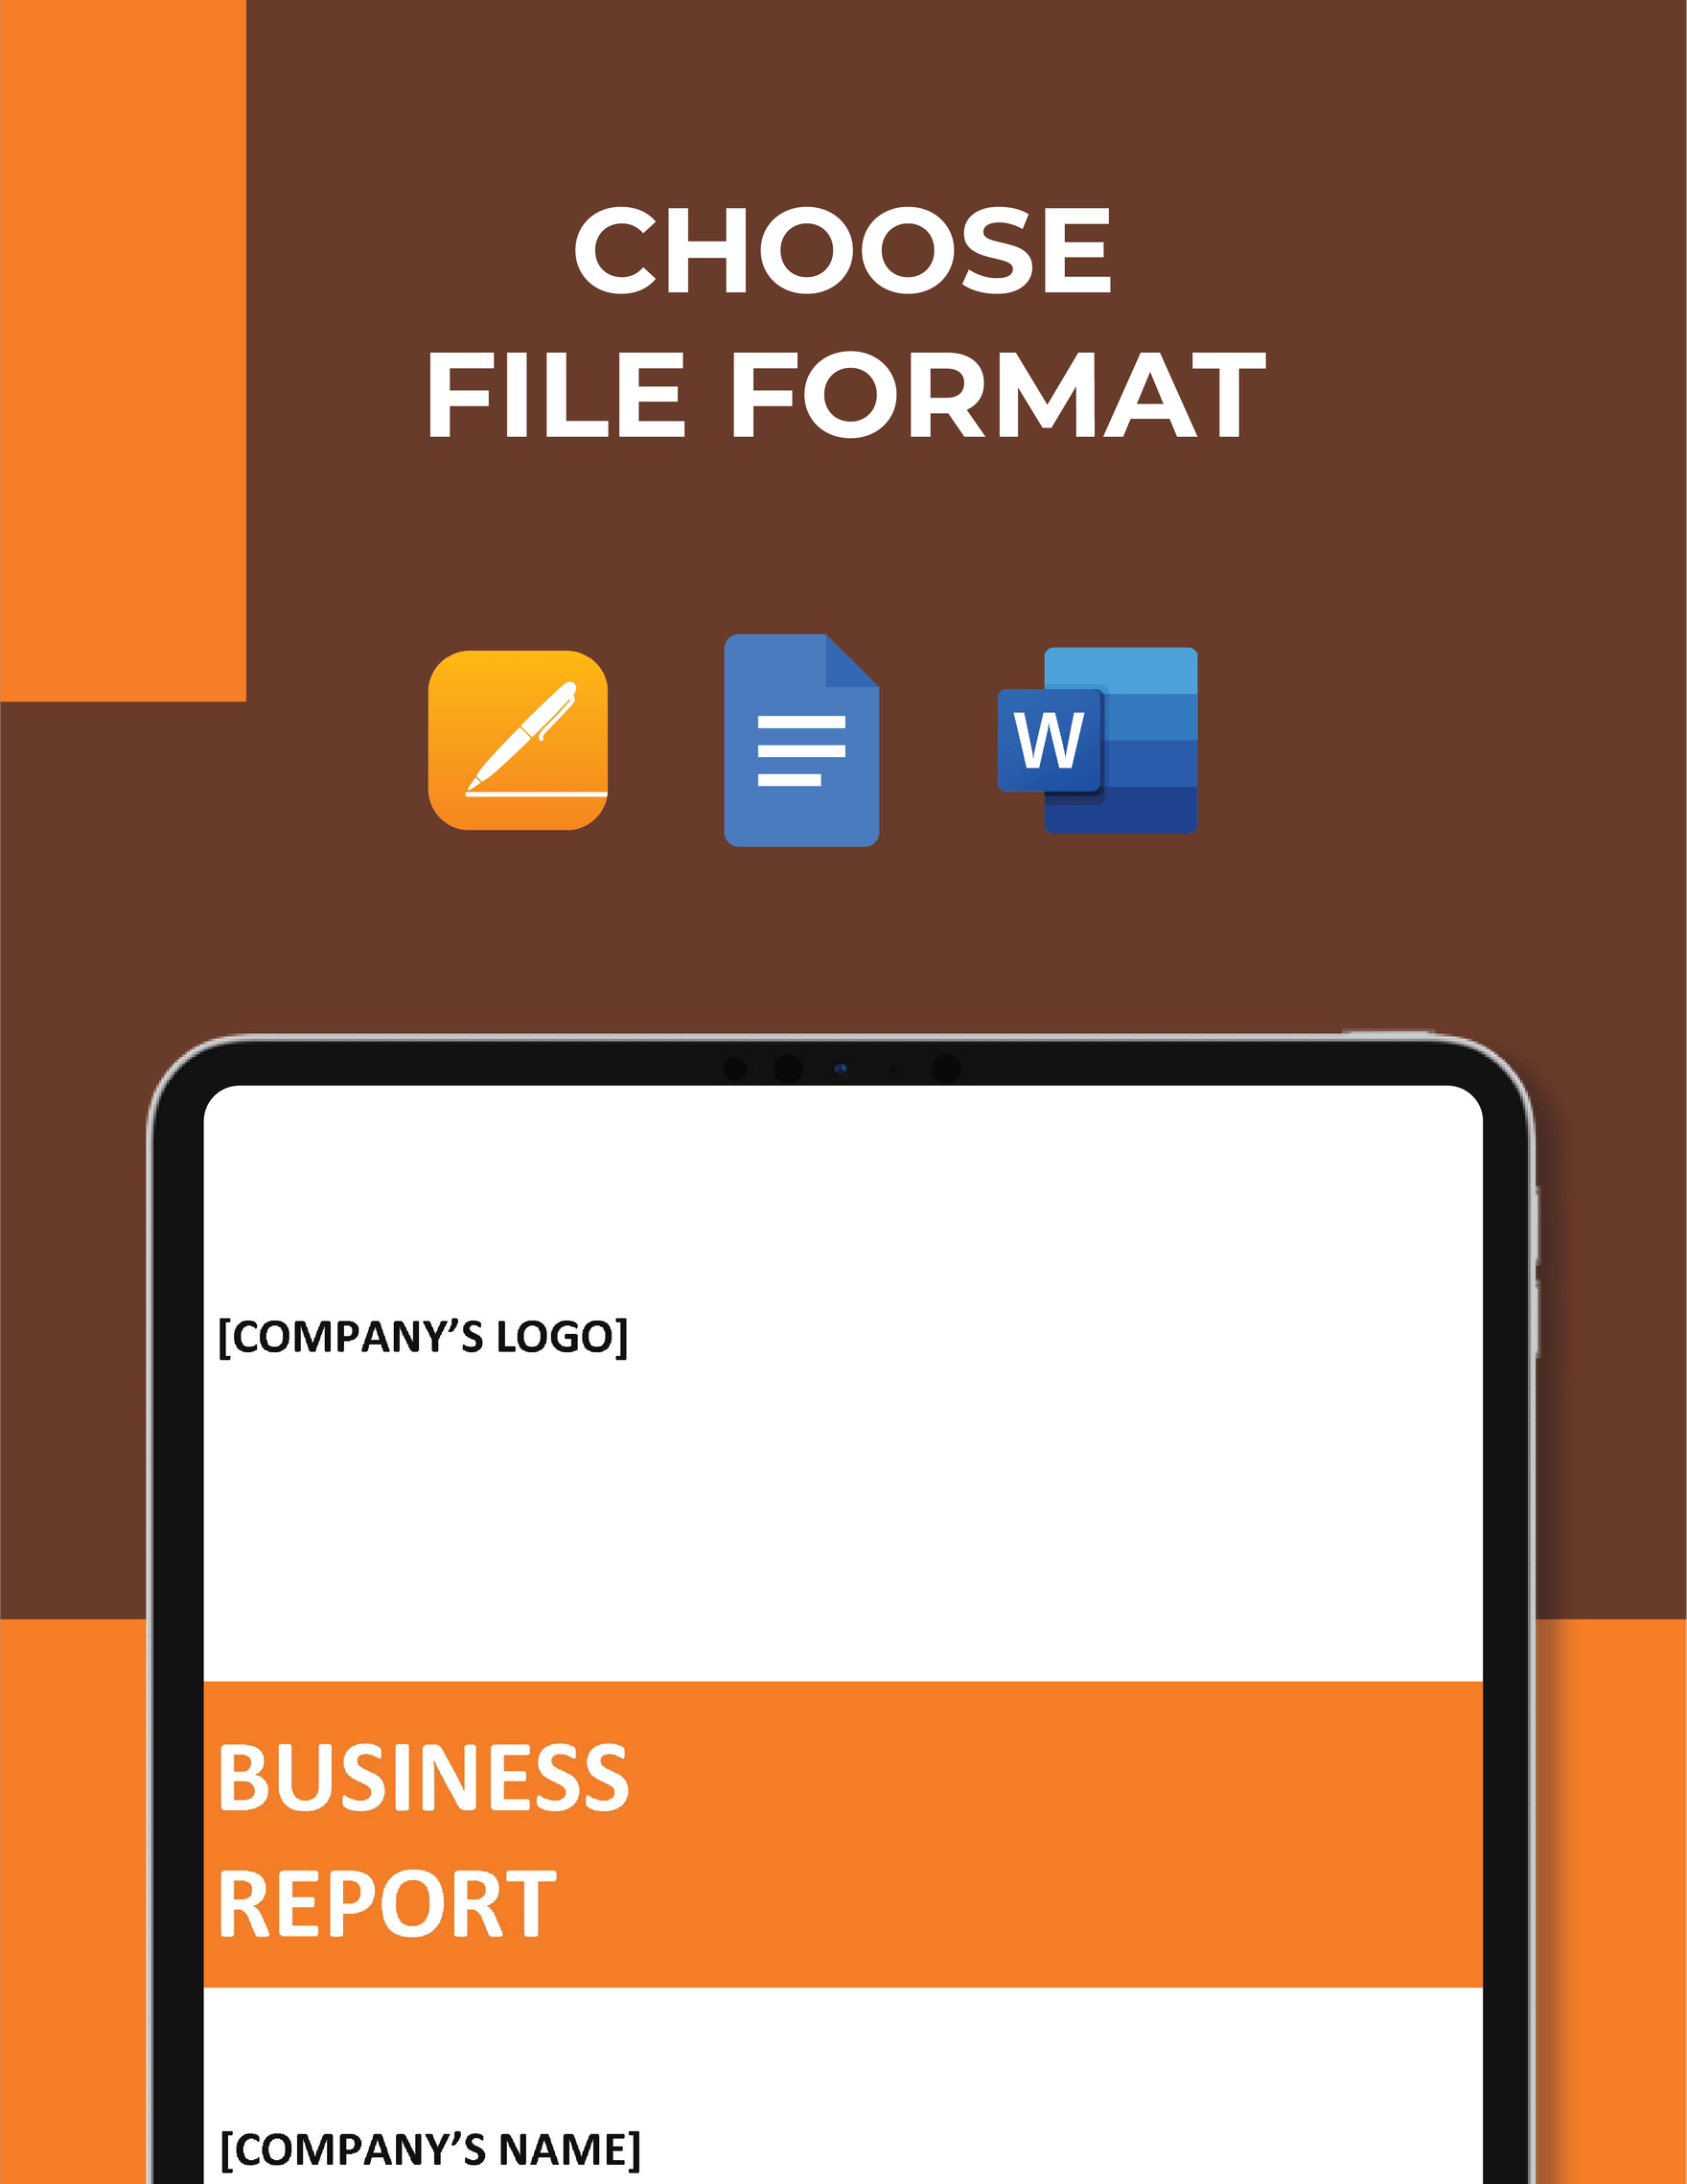 Business Report Sample Template